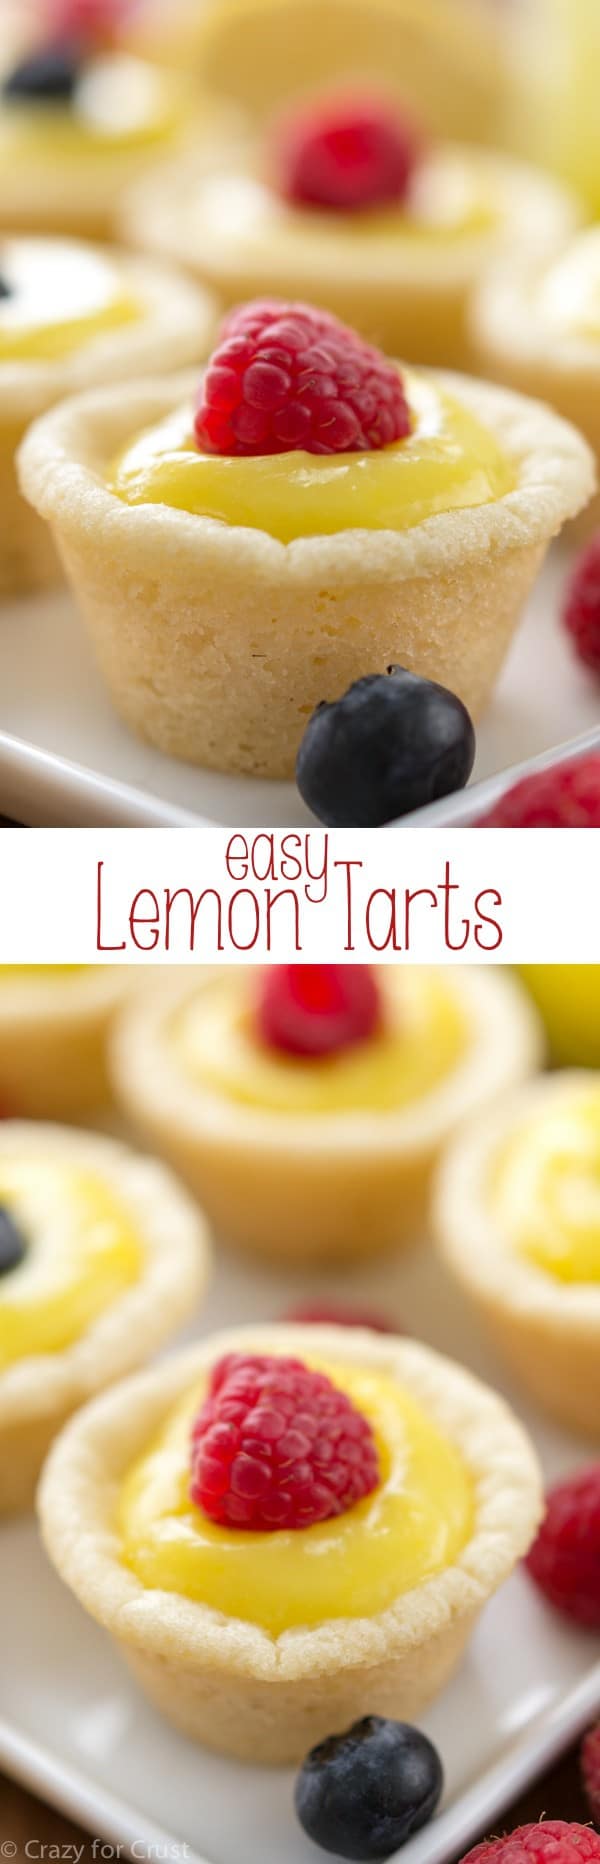 These Easy Lemon Tarts have only 3 ingredients and will satisfy your lemon craving!